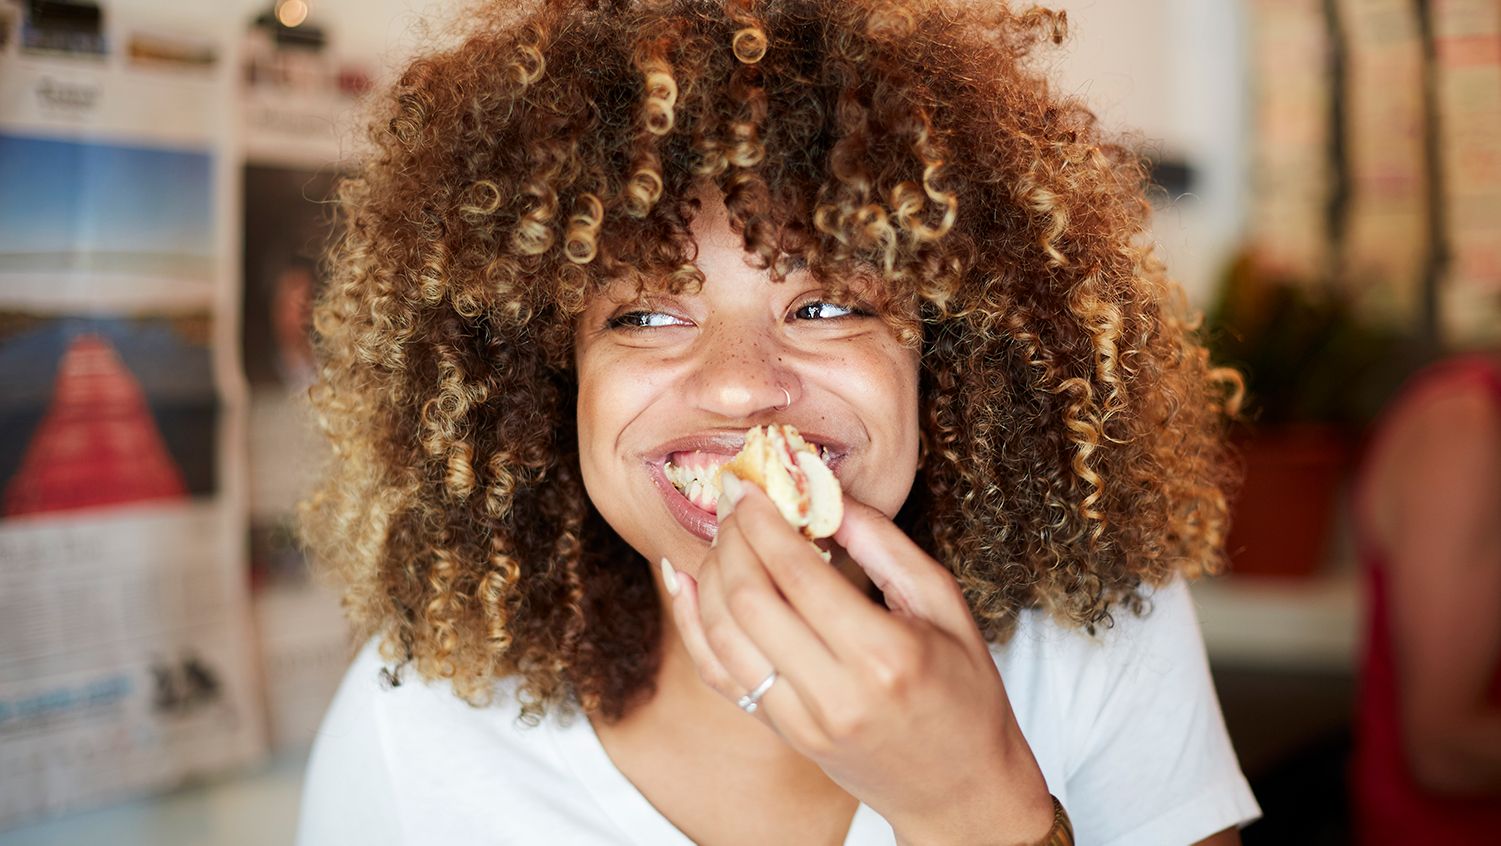 A woman smiles while eating a sandwich